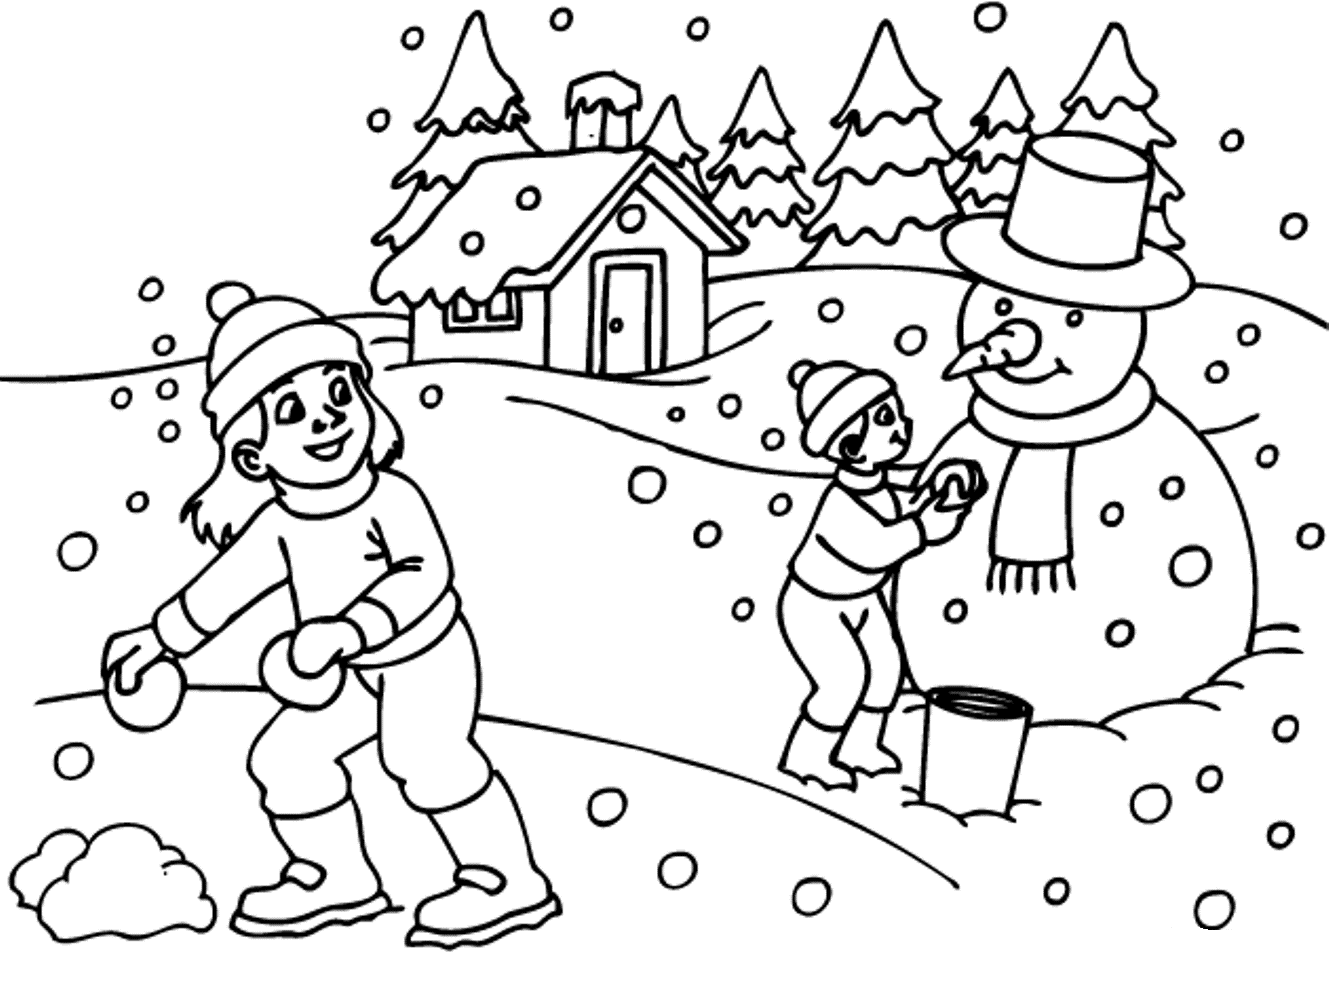 colouring sheets winter winter coloring pages to download and print for free winter sheets colouring 